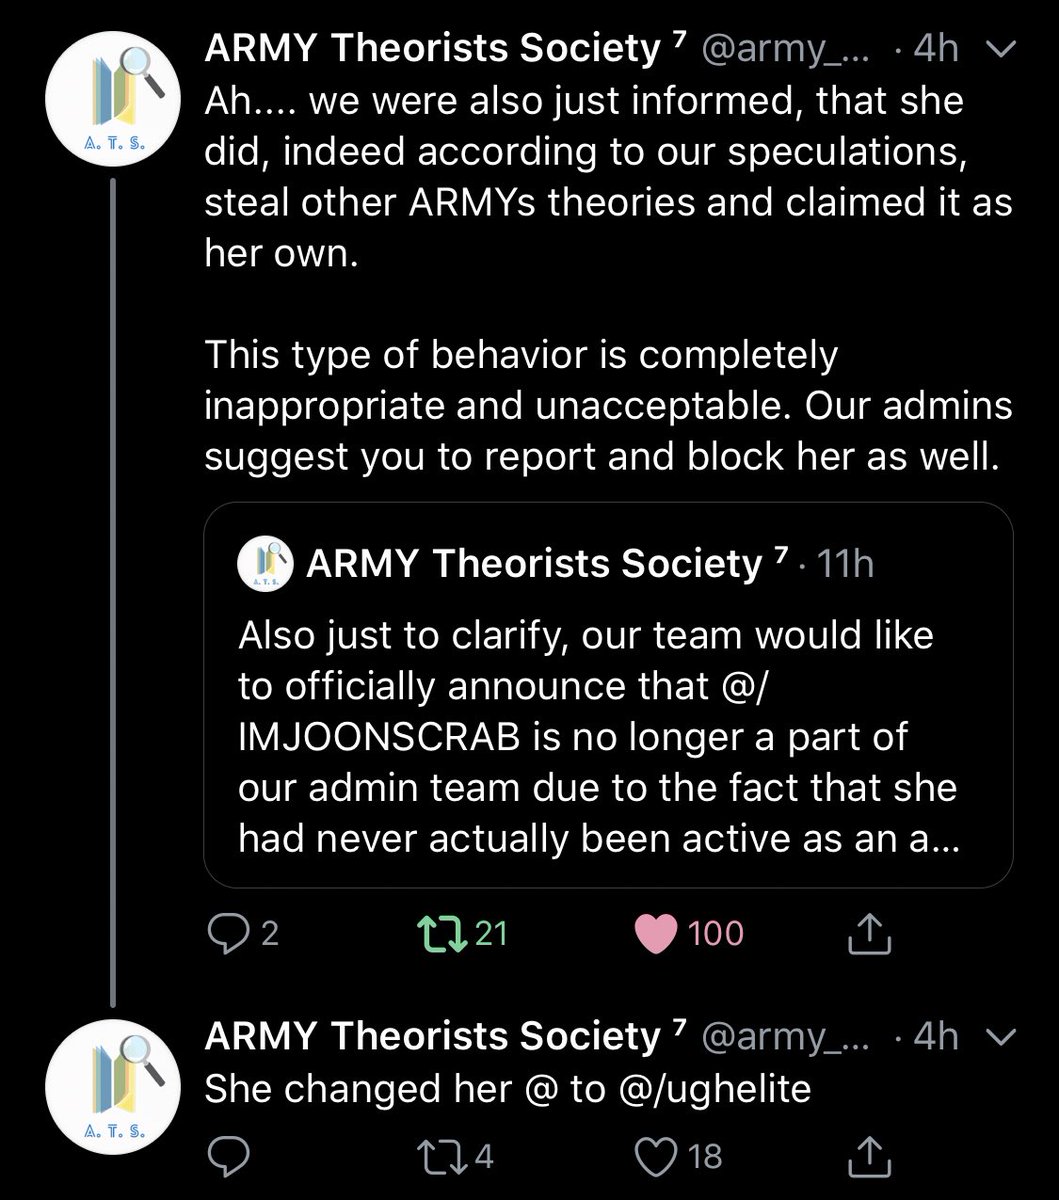 Her theory posts were stolen from other people too